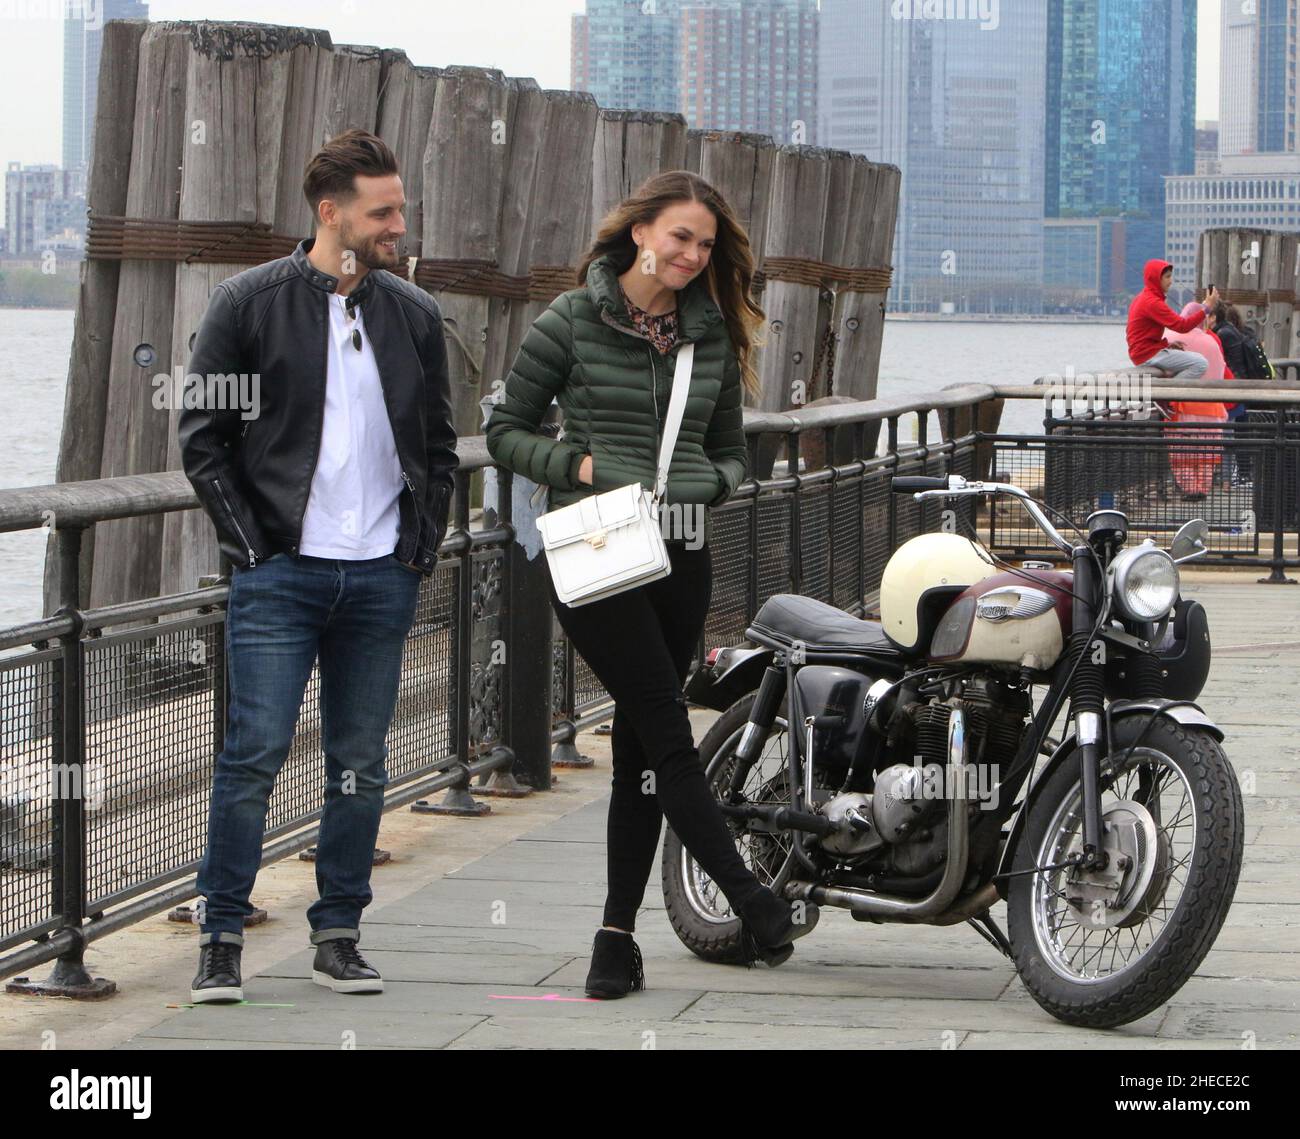 New York - NY - 20190426 Sutton Foster and Nico Tortorella film a romantic  walk scene for the upcoming season of 'Younger'on set in Battery Park in  Manhattan. -PICTURED: Nico TortorellaSutton Foster